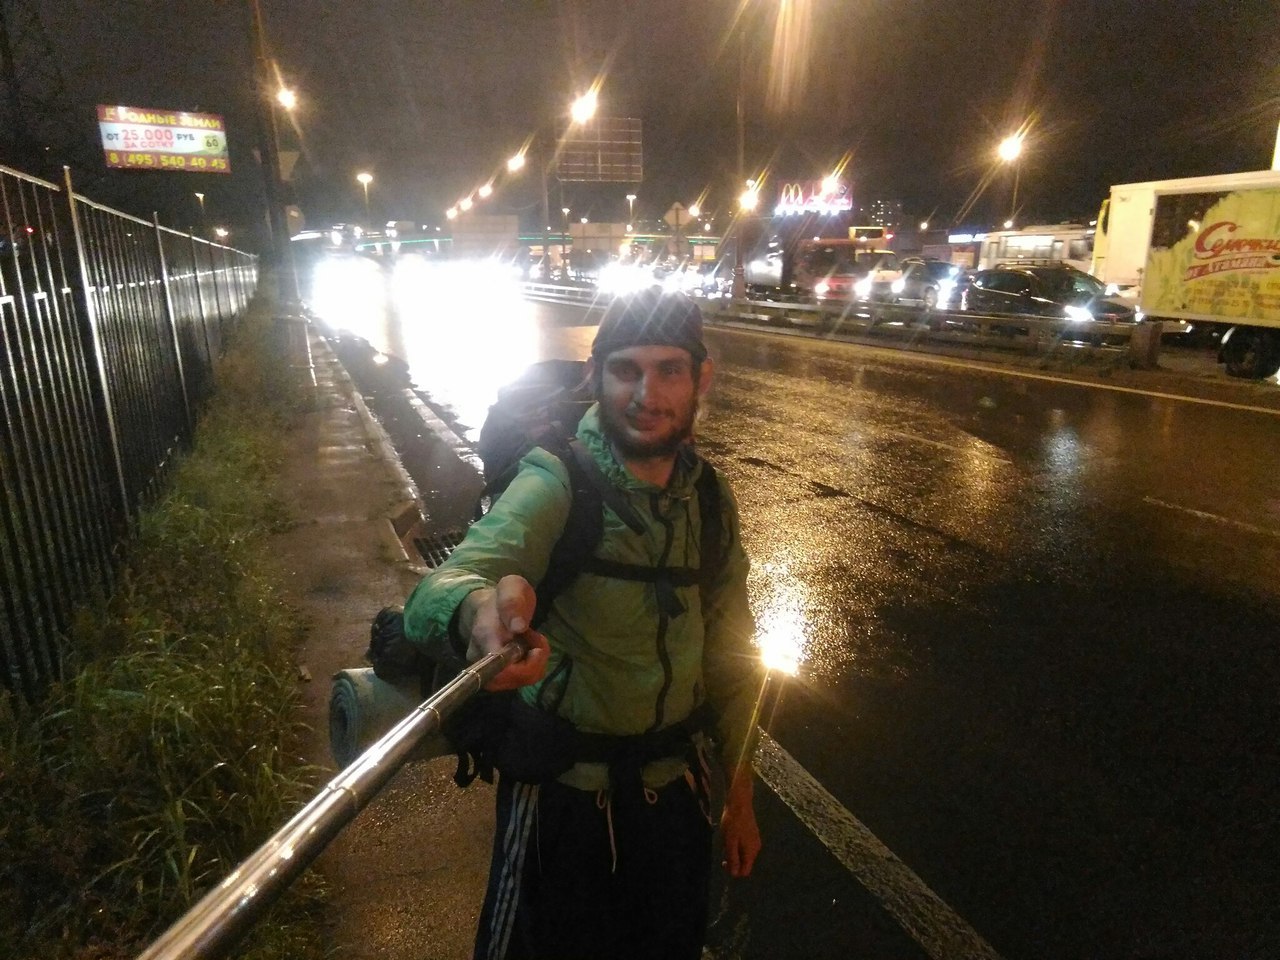 43 days of travel, 6 cities, 30 days of overnight stay in a tent, a lot of calluses, new acquaintances, 1082 km of walking... - My, Hike, Tourism, On foot, Travel across Russia, Moscow, Longpost